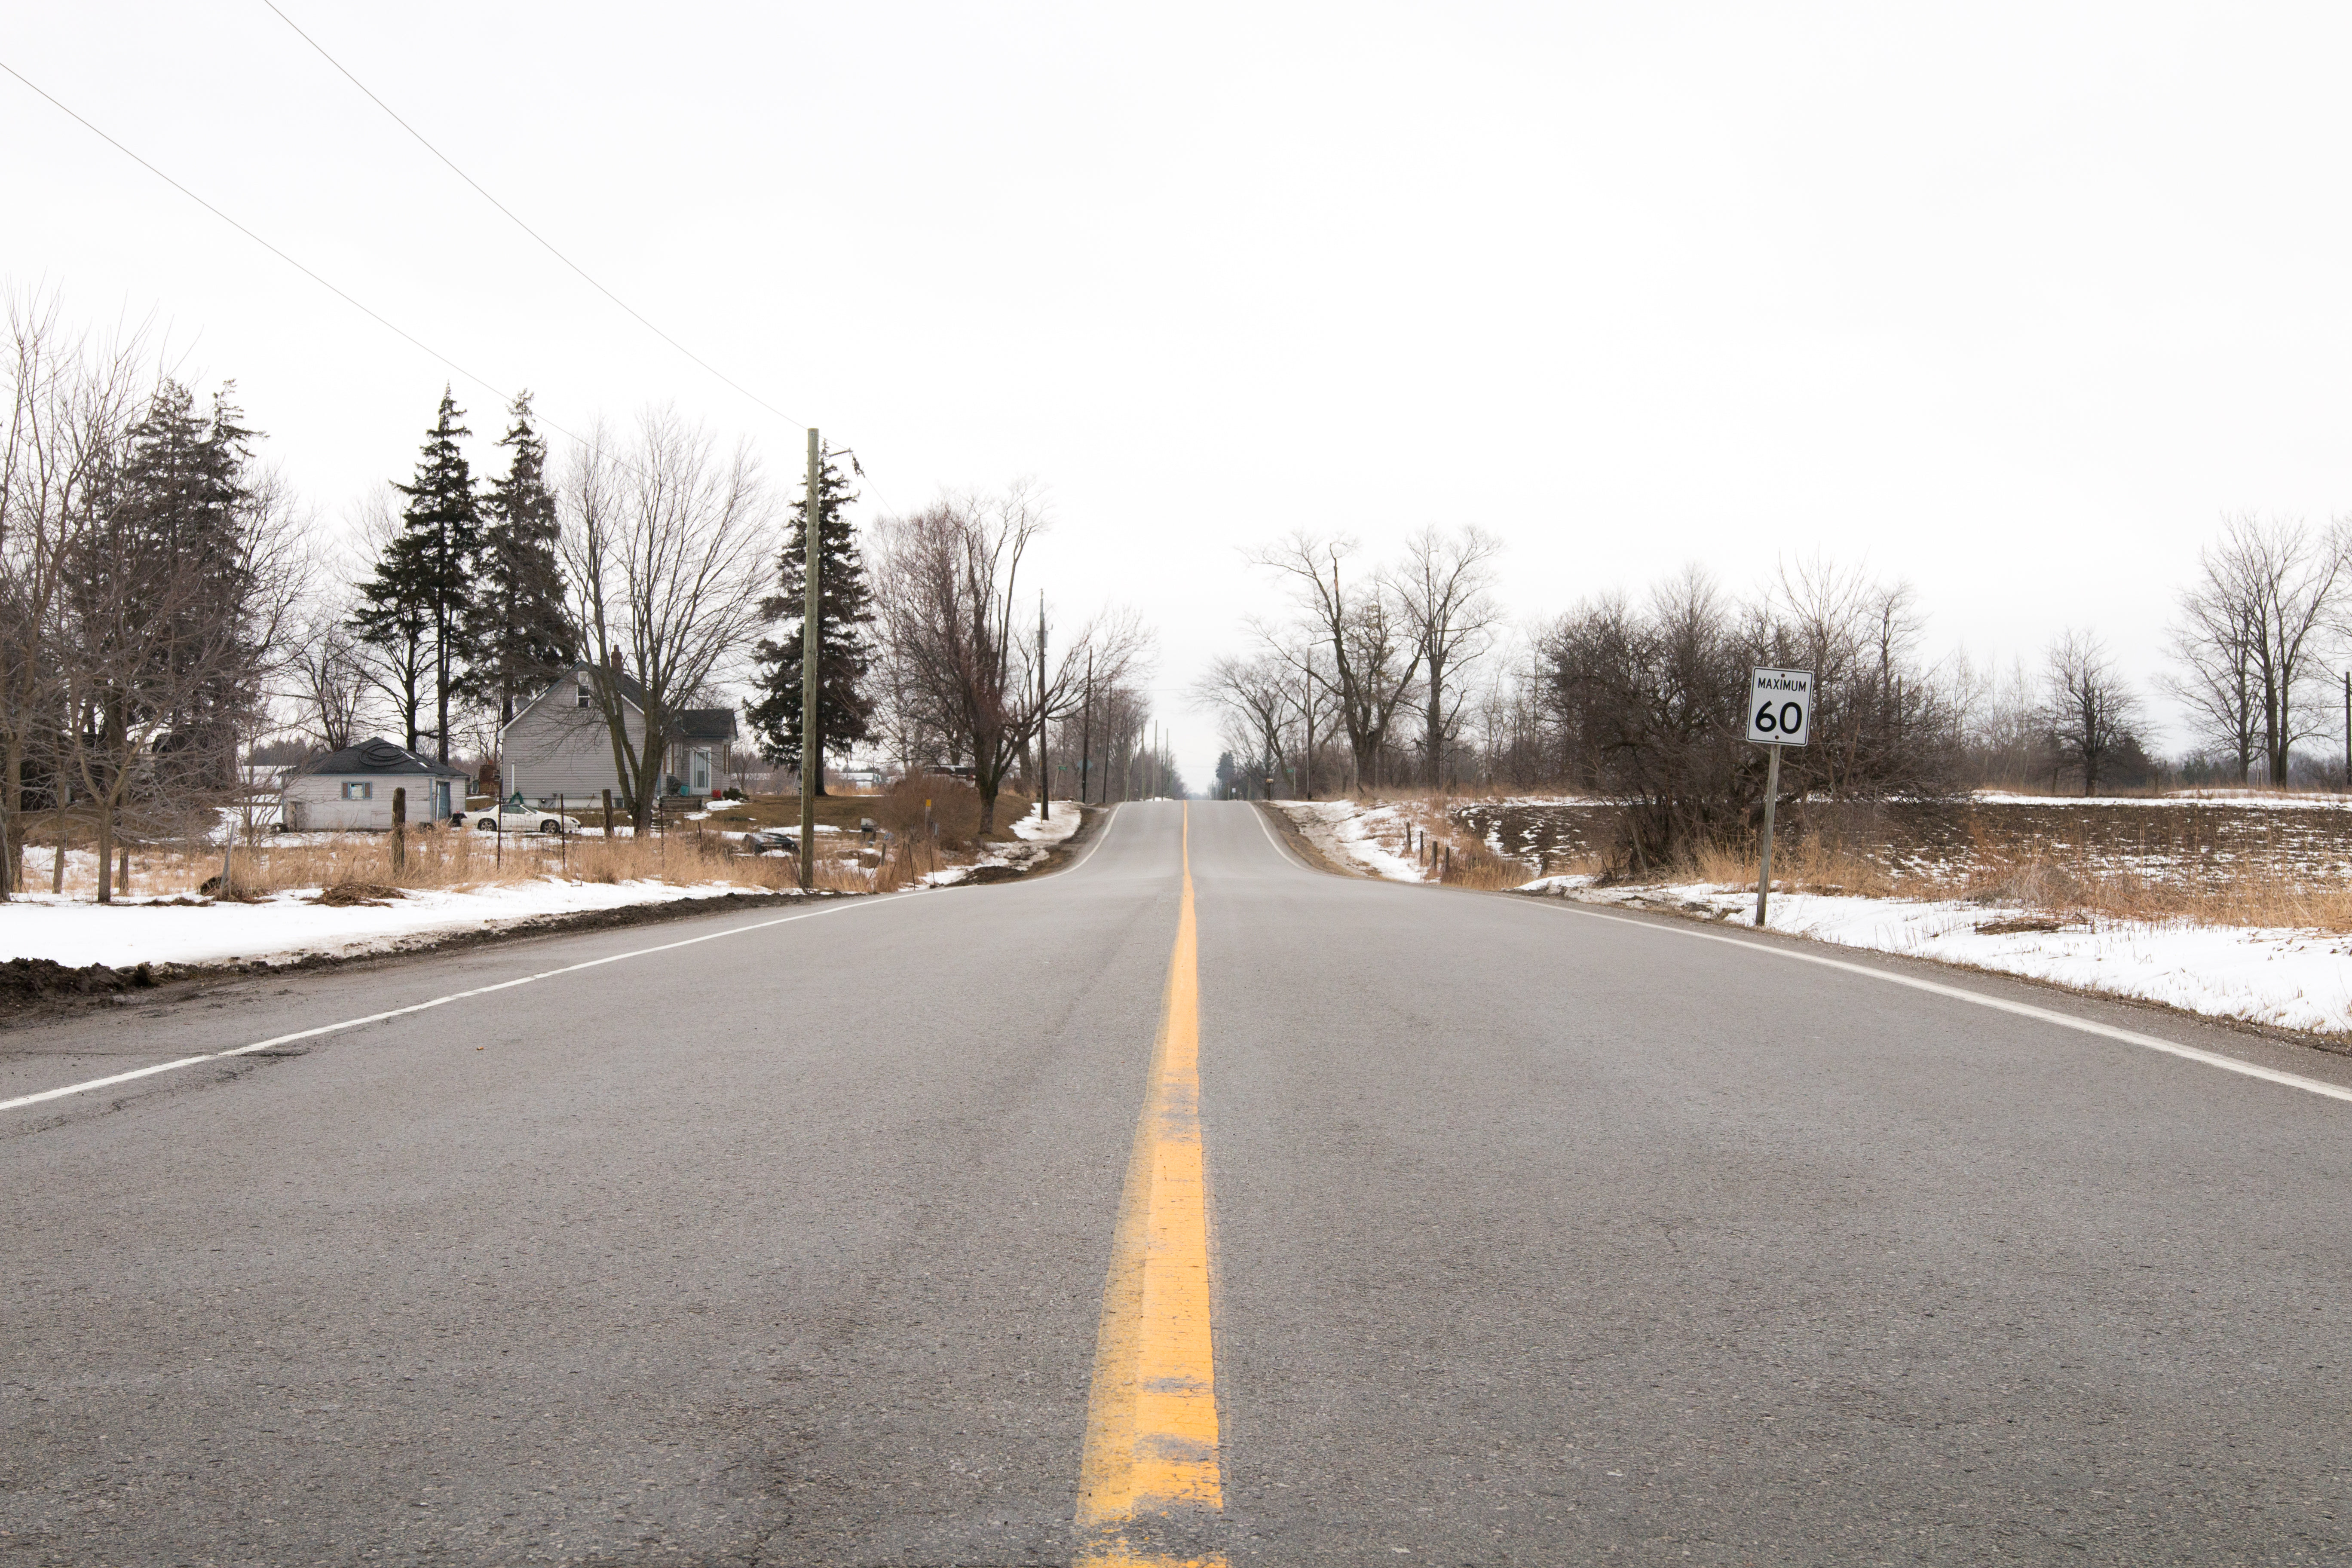 Browse Free HD Images of A Quiet Road In The Last Moments Of Winter